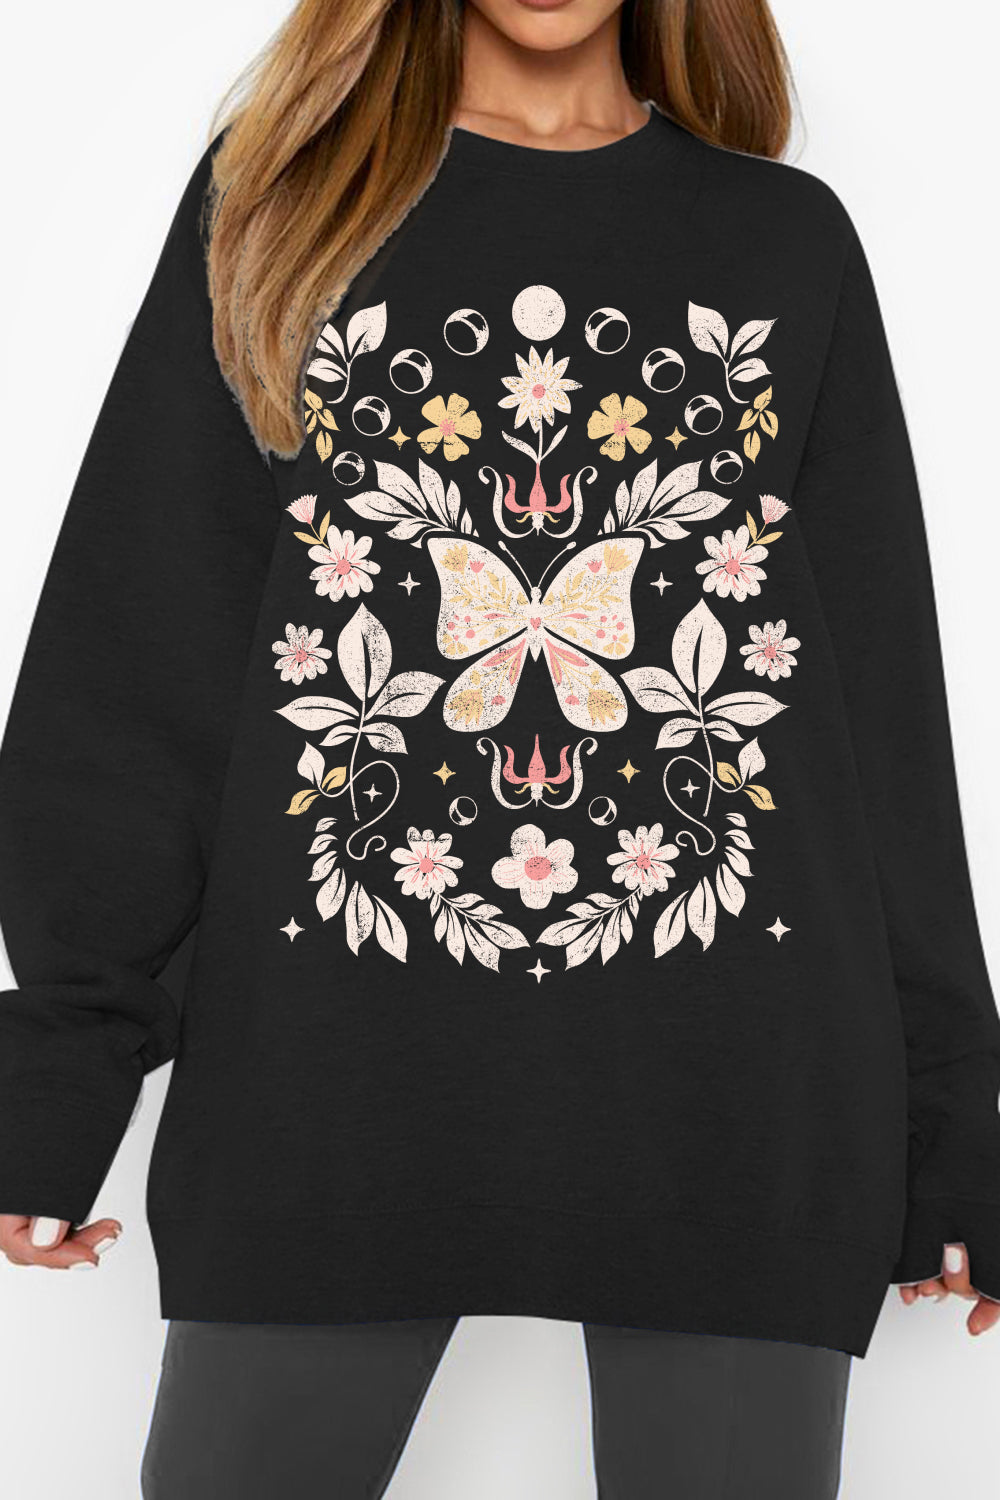 Dark Slate Gray Simply Love Full Size Flower and Butterfly Graphic Sweatshirt Sentient Beauty Fashions Apparel & Accessories